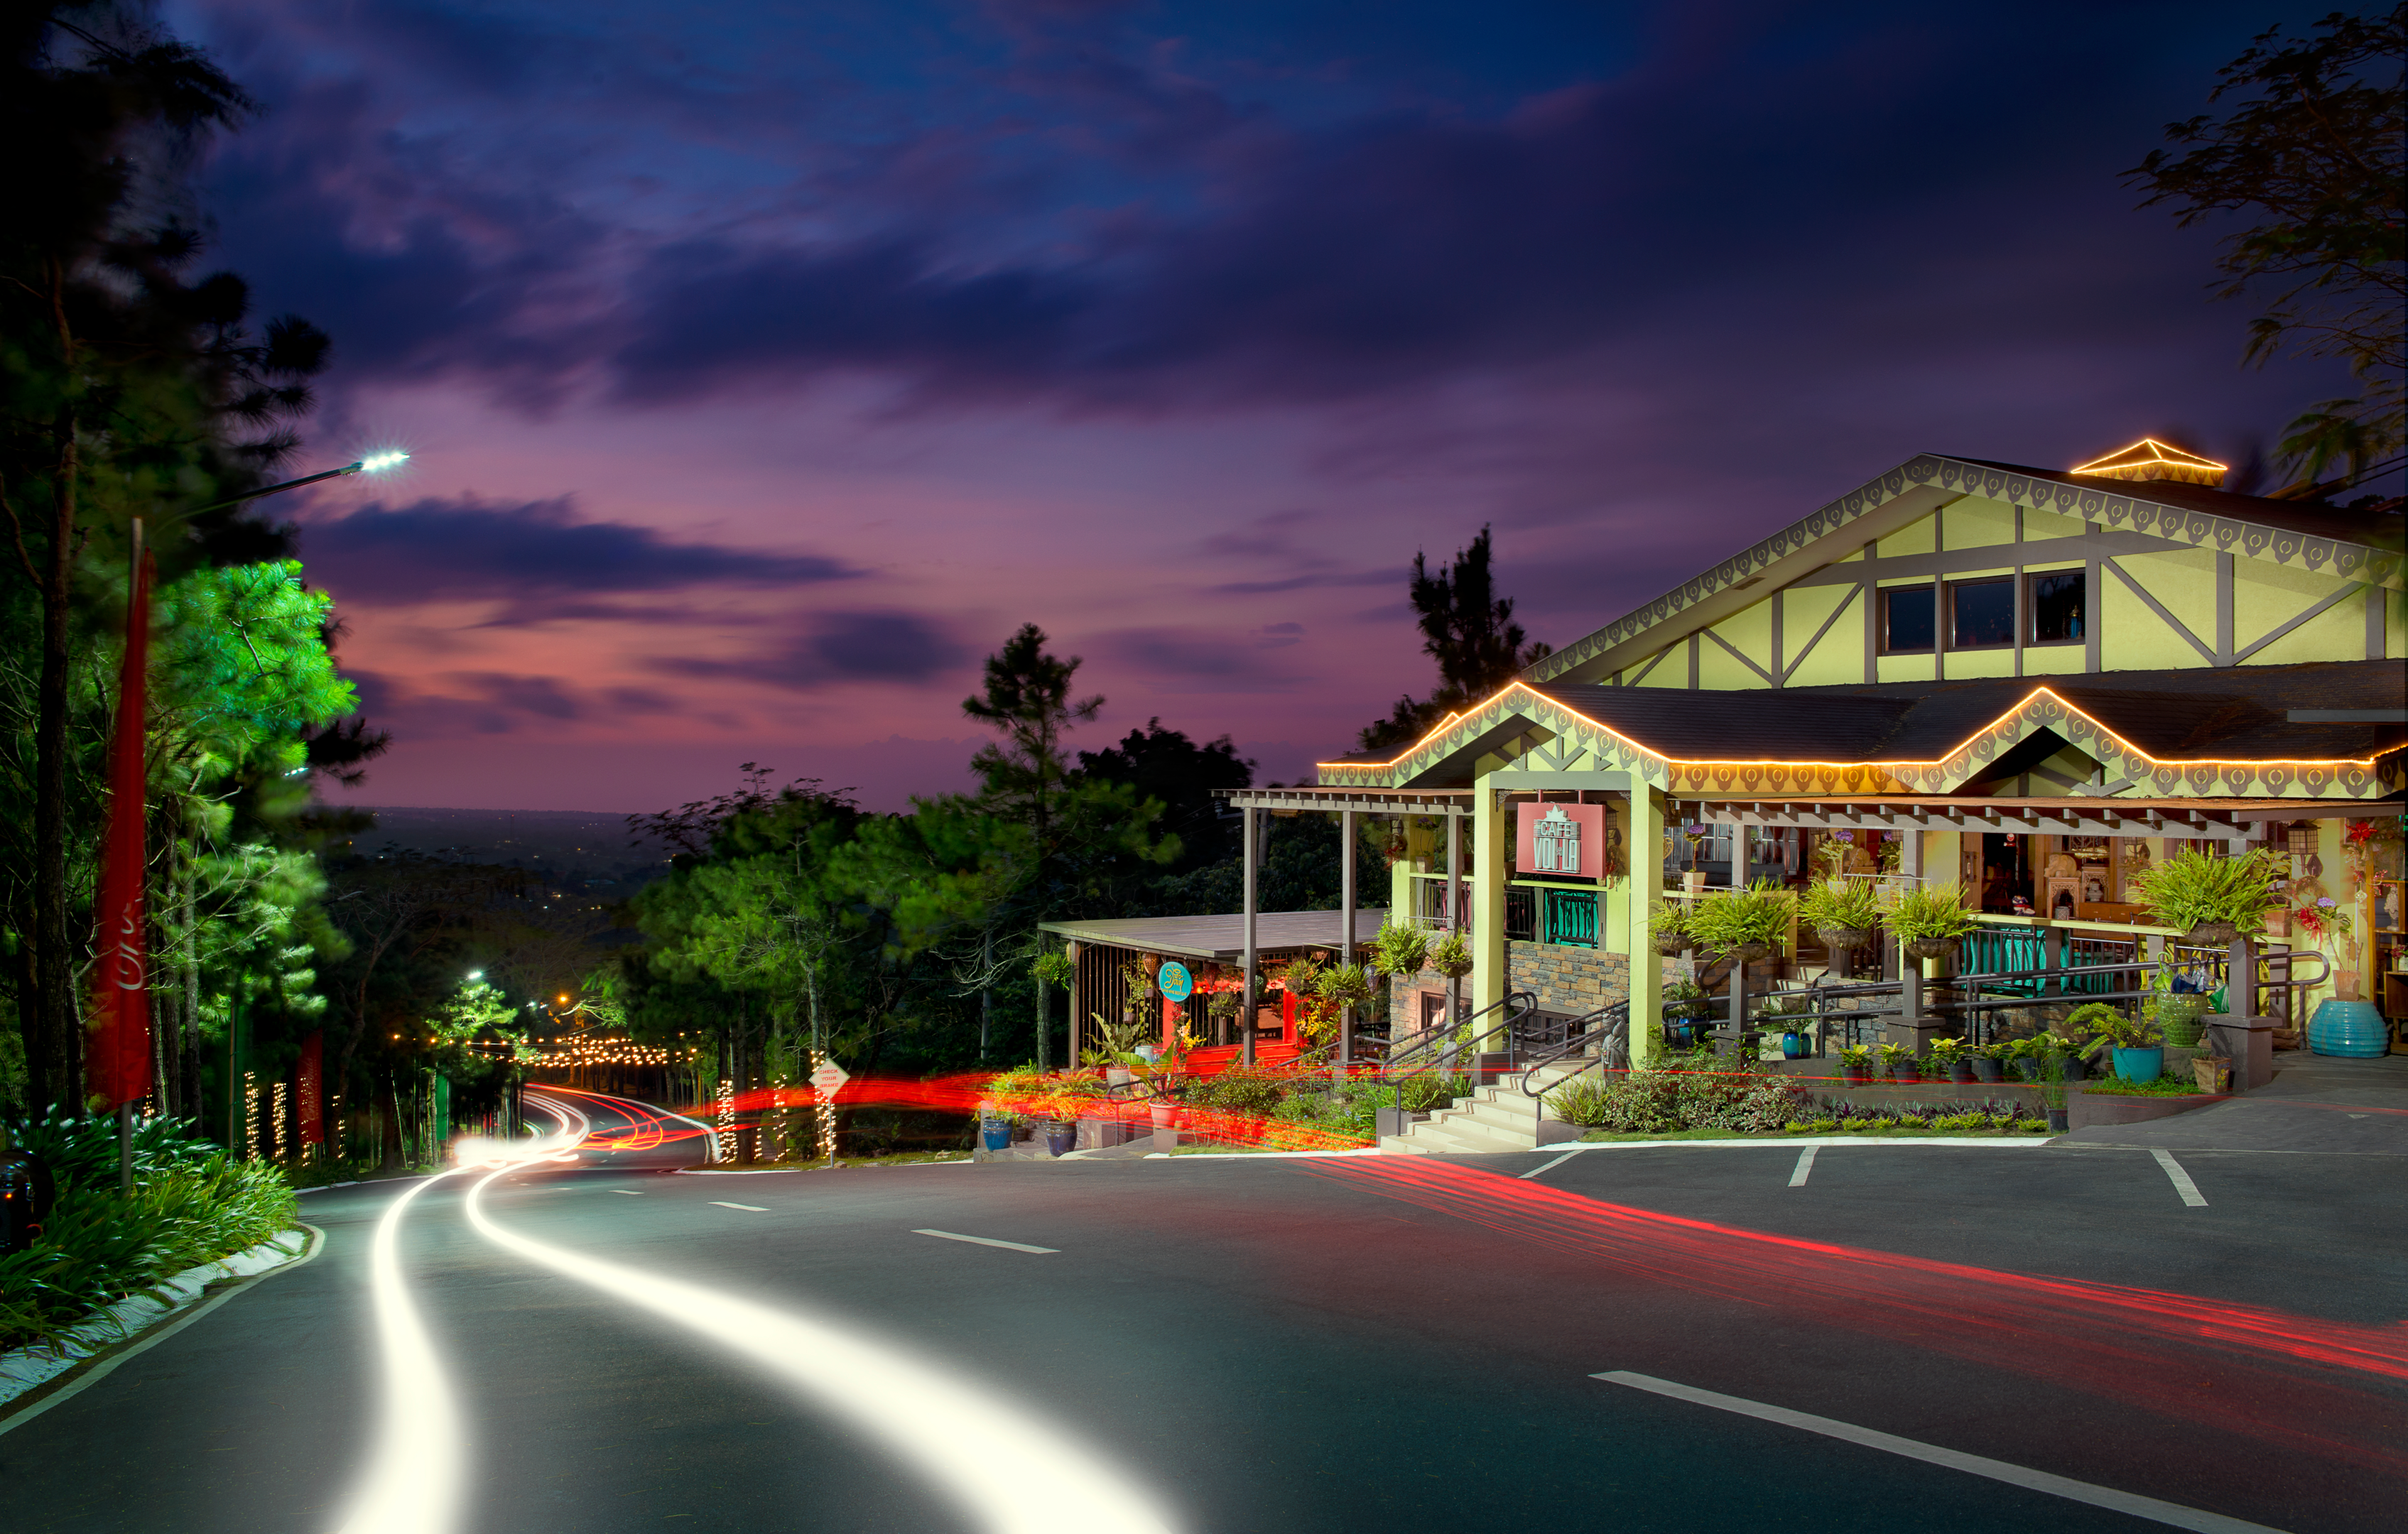 Crosswinds is a unique Swiss-inspired community in Tagaytay.